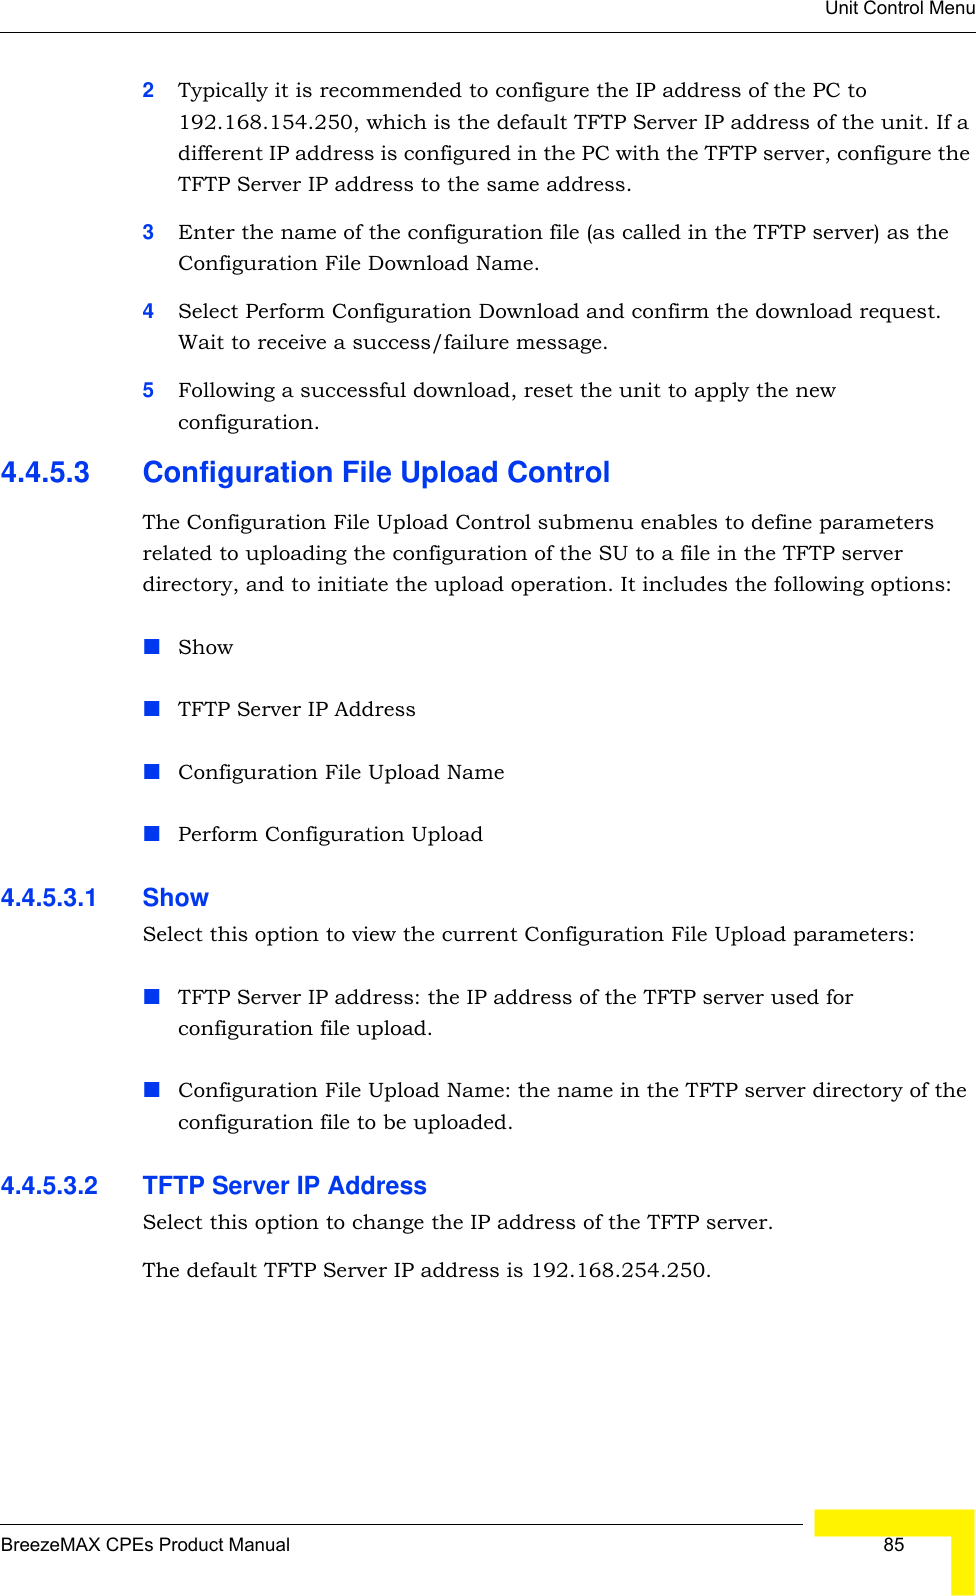 Unit Control MenuBreezeMAX CPEs Product Manual  852Typically it is recommended to configure the IP address of the PC to 192.168.154.250, which is the default TFTP Server IP address of the unit. If a different IP address is configured in the PC with the TFTP server, configure the TFTP Server IP address to the same address.3Enter the name of the configuration file (as called in the TFTP server) as the Configuration File Download Name.4Select Perform Configuration Download and confirm the download request. Wait to receive a success/failure message.5Following a successful download, reset the unit to apply the new configuration.4.4.5.3 Configuration File Upload ControlThe Configuration File Upload Control submenu enables to define parameters related to uploading the configuration of the SU to a file in the TFTP server directory, and to initiate the upload operation. It includes the following options:ShowTFTP Server IP AddressConfiguration File Upload NamePerform Configuration Upload4.4.5.3.1 Show Select this option to view the current Configuration File Upload parameters:TFTP Server IP address: the IP address of the TFTP server used for configuration file upload.Configuration File Upload Name: the name in the TFTP server directory of the configuration file to be uploaded.4.4.5.3.2 TFTP Server IP AddressSelect this option to change the IP address of the TFTP server.The default TFTP Server IP address is 192.168.254.250.